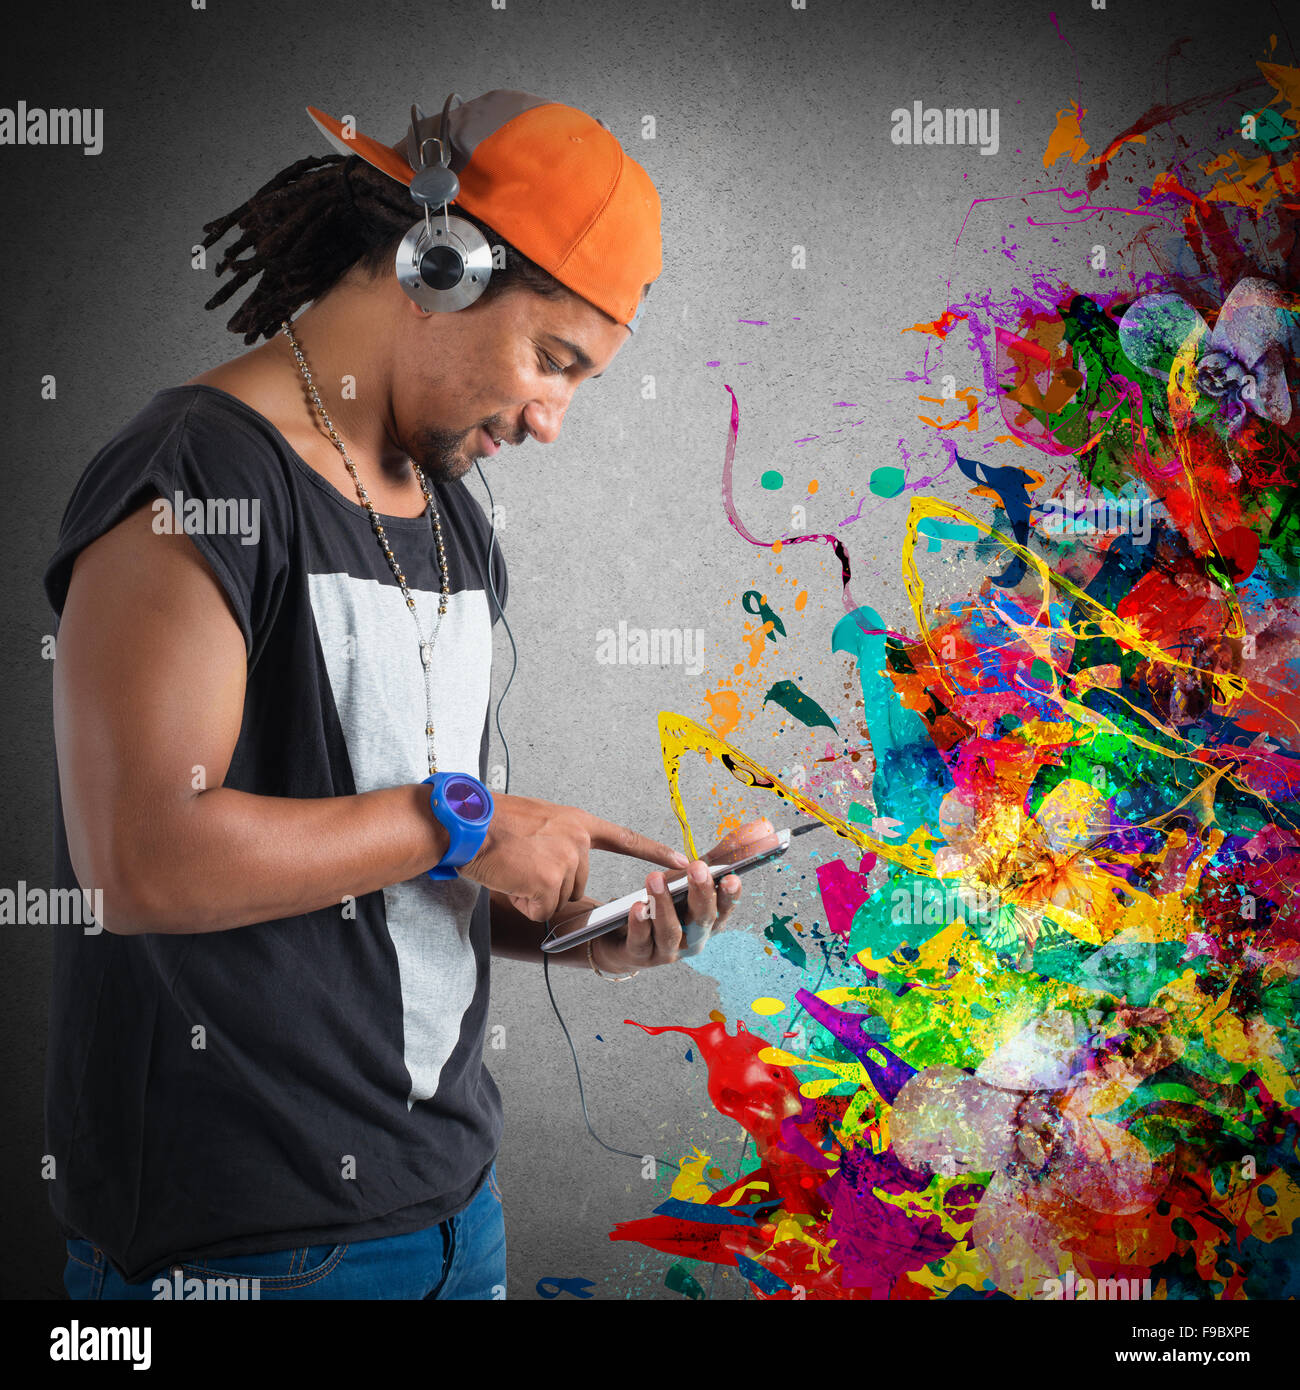 Hiphop style and music Stock Photo